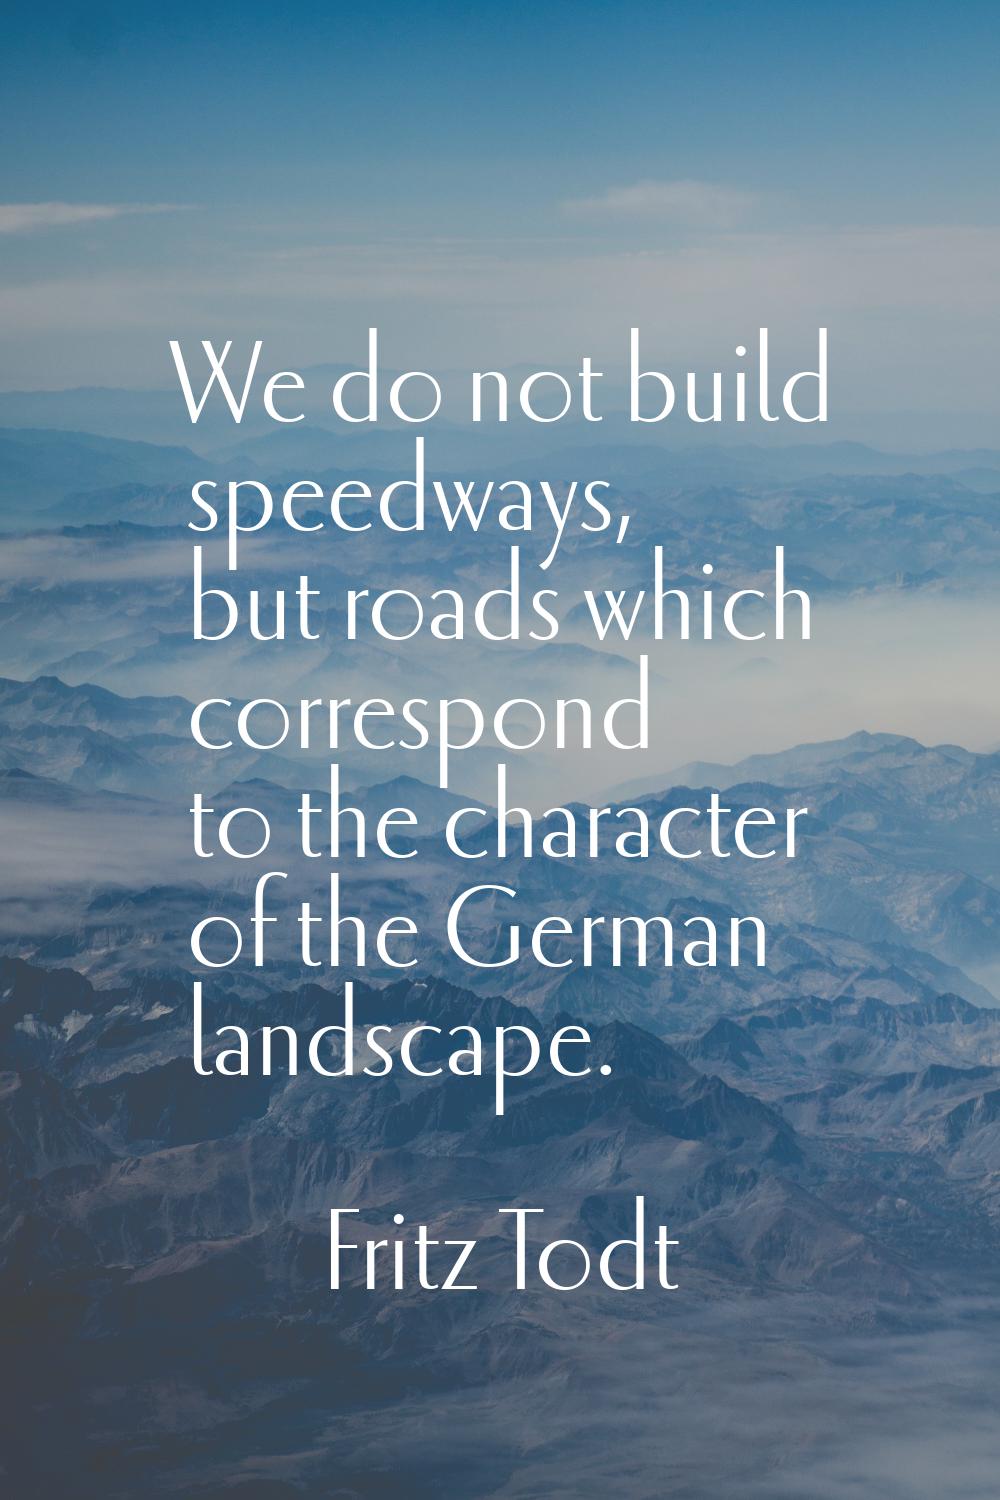 We do not build speedways, but roads which correspond to the character of the German landscape.